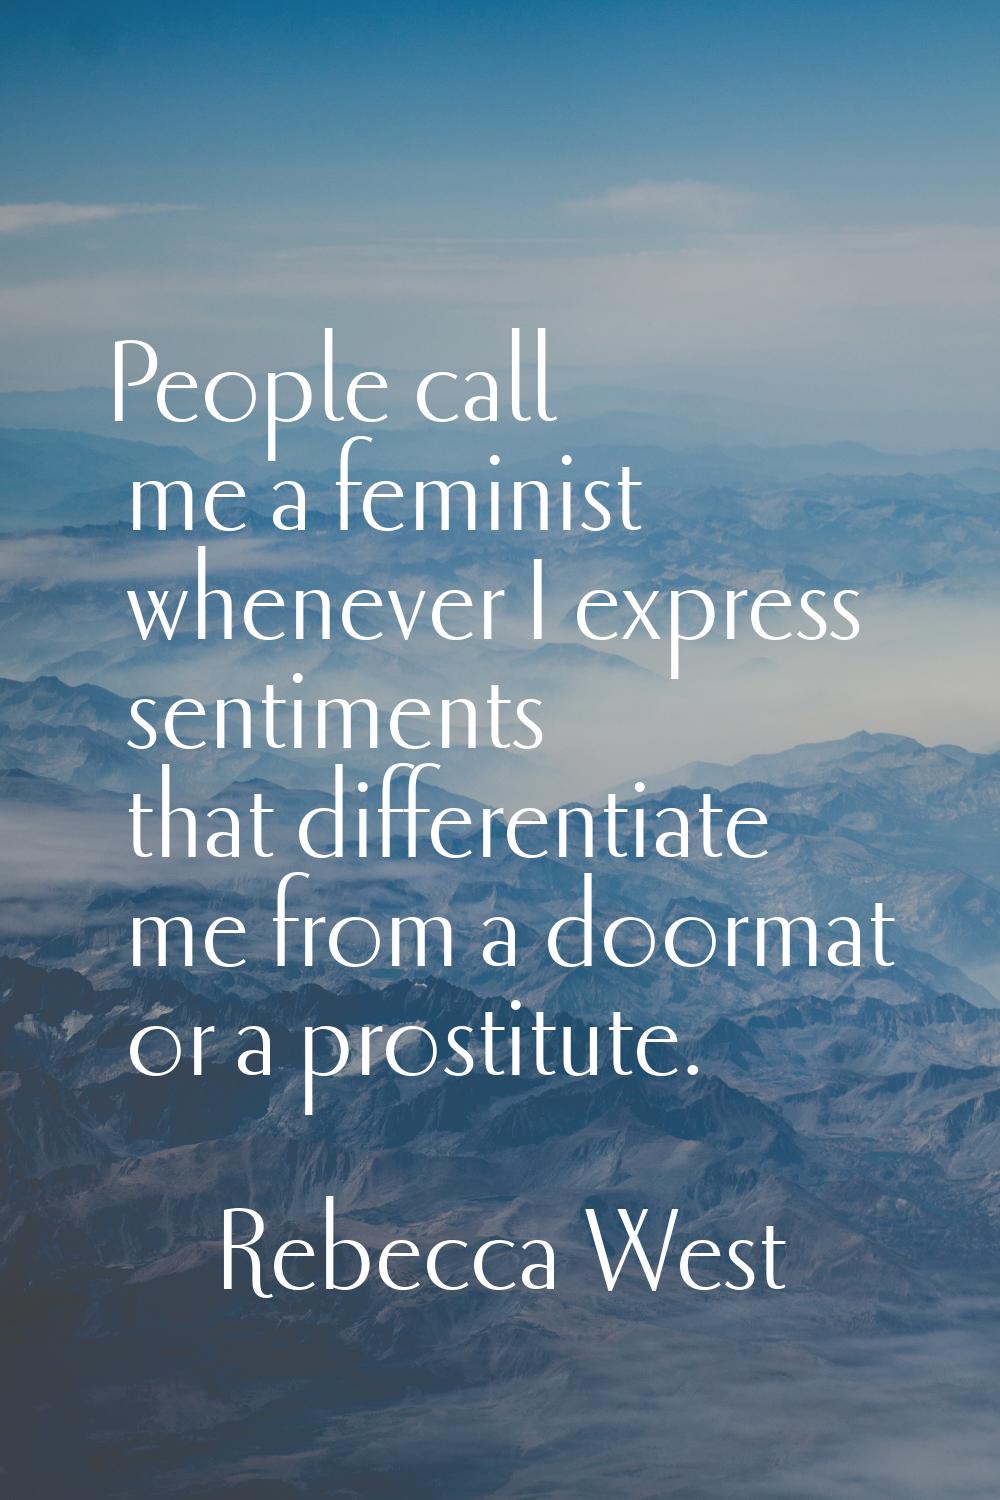 People call me a feminist whenever I express sentiments that differentiate me from a doormat or a p